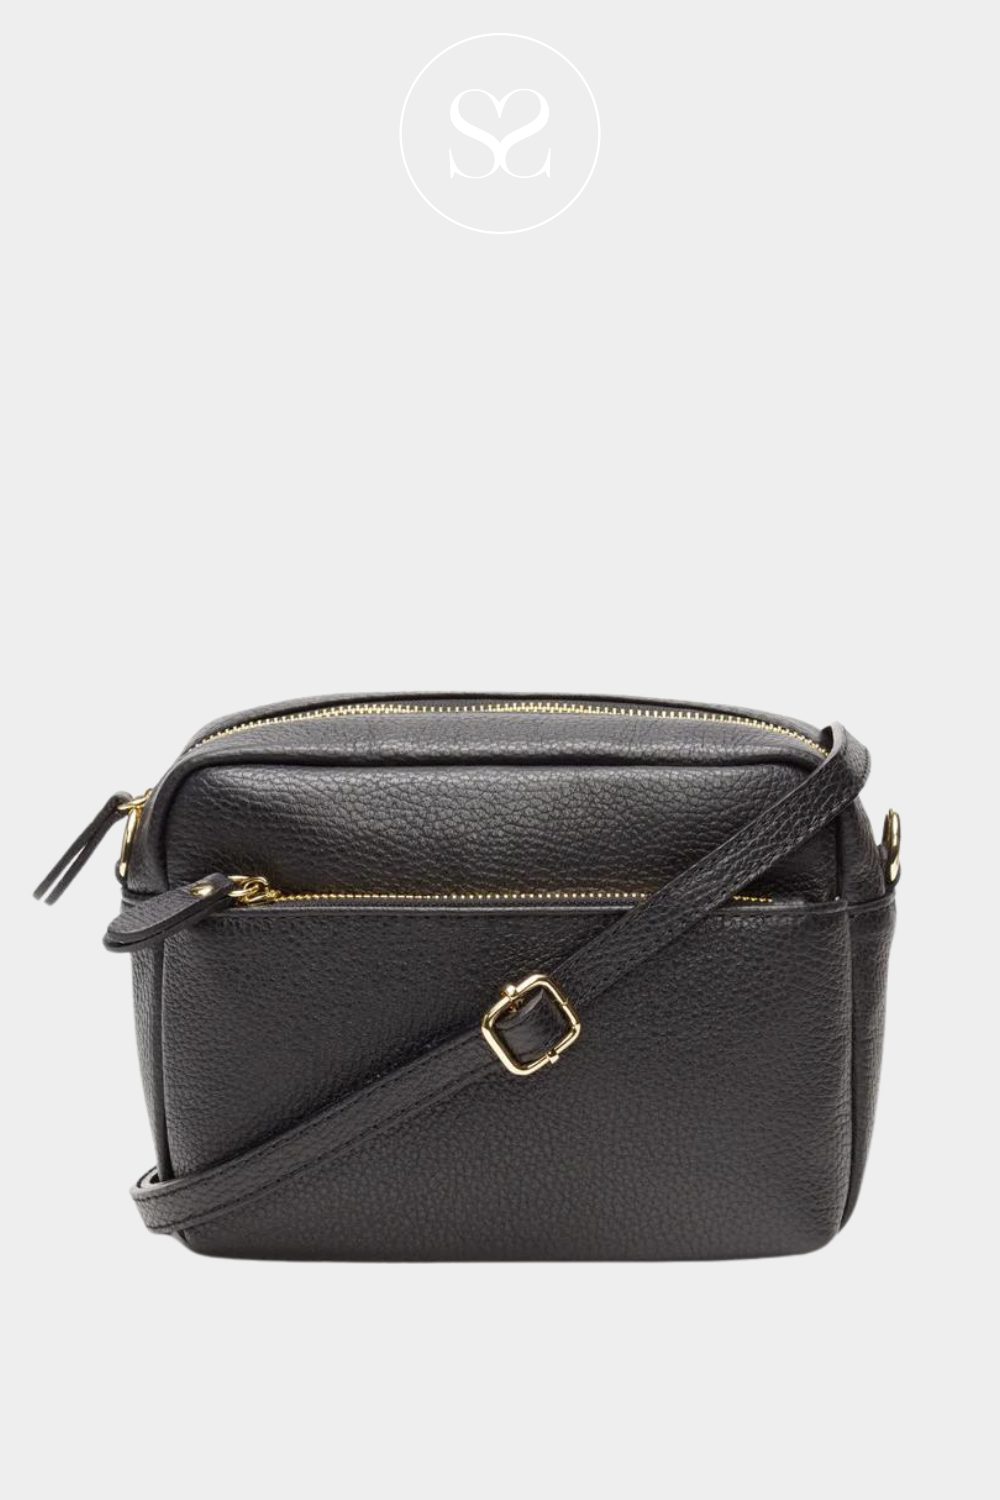 elie beaumont crossbody town bag in black leather